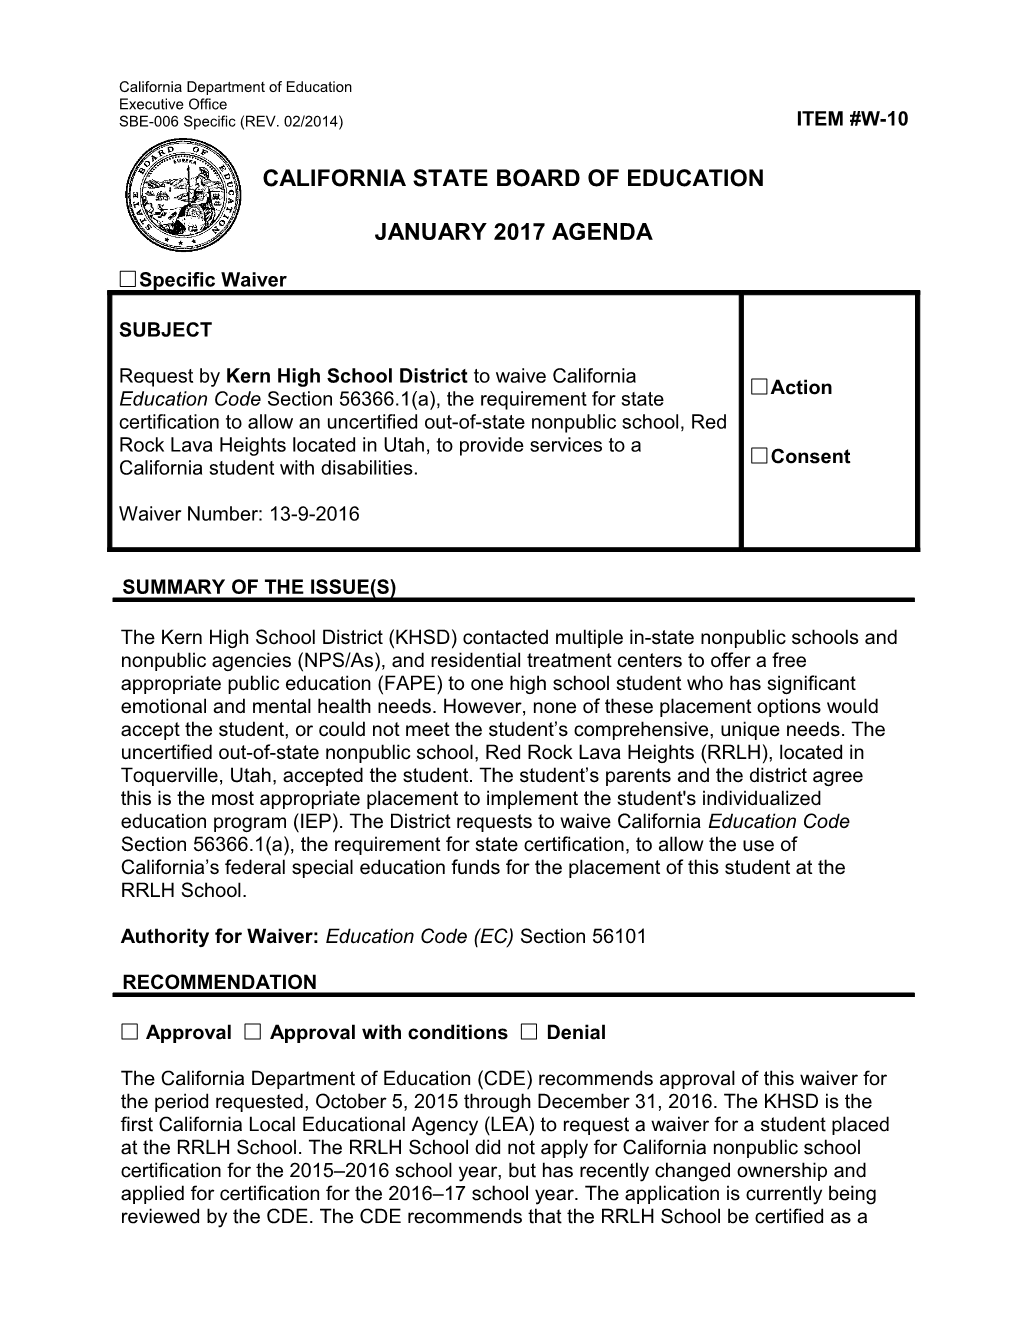 January 2017 Waiver Item W-10 - Meeting Agendas (CA State Board of Education)